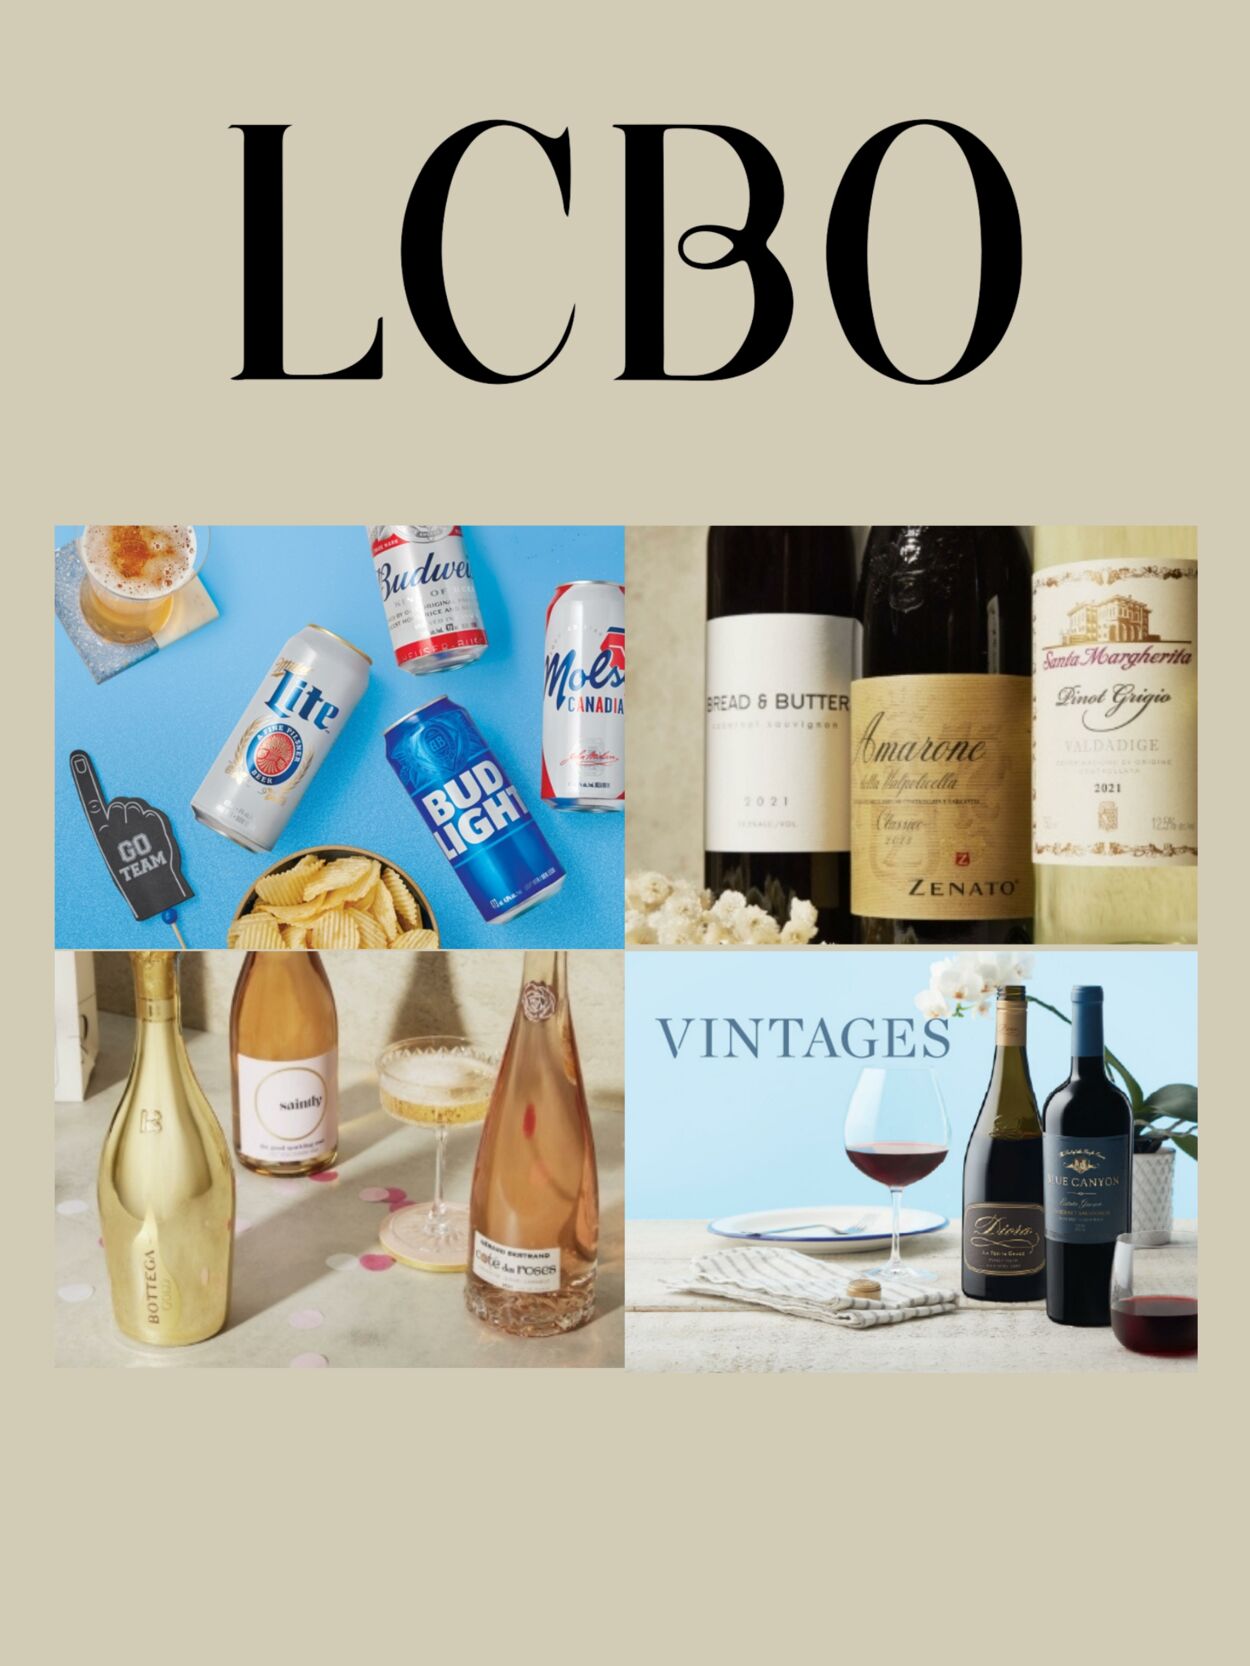 LCBO Promotional flyers